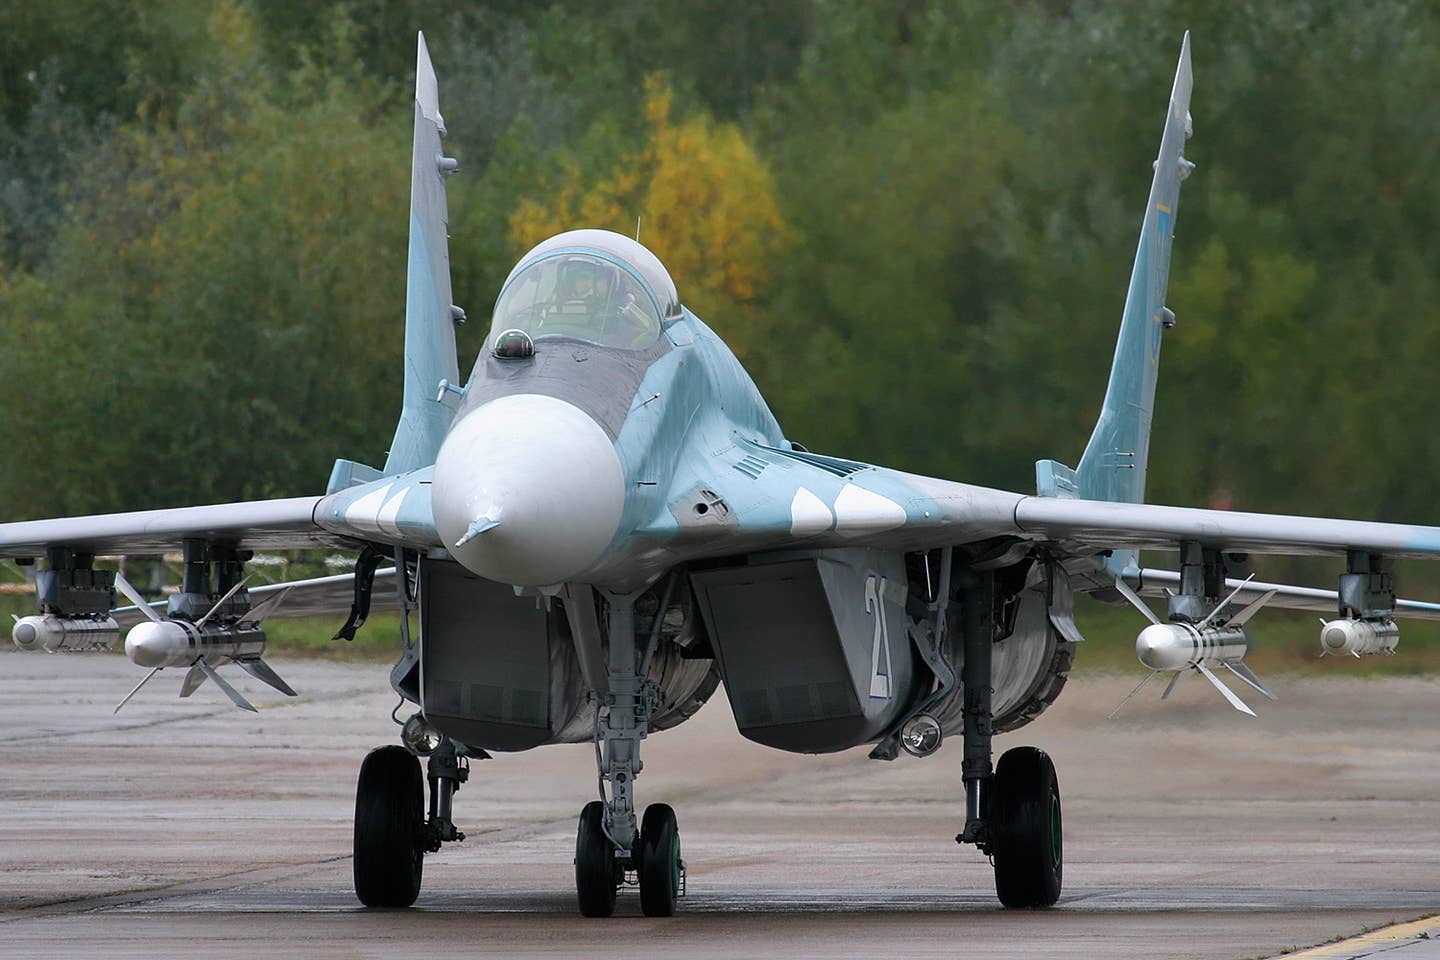 An example of a pre-war Ukrainian MiG-29 with a light gray radome and with inert R-27R missiles on the inner underwing pylons. <em>Oleg V. Belyakov/Wikimedia Commons</em>